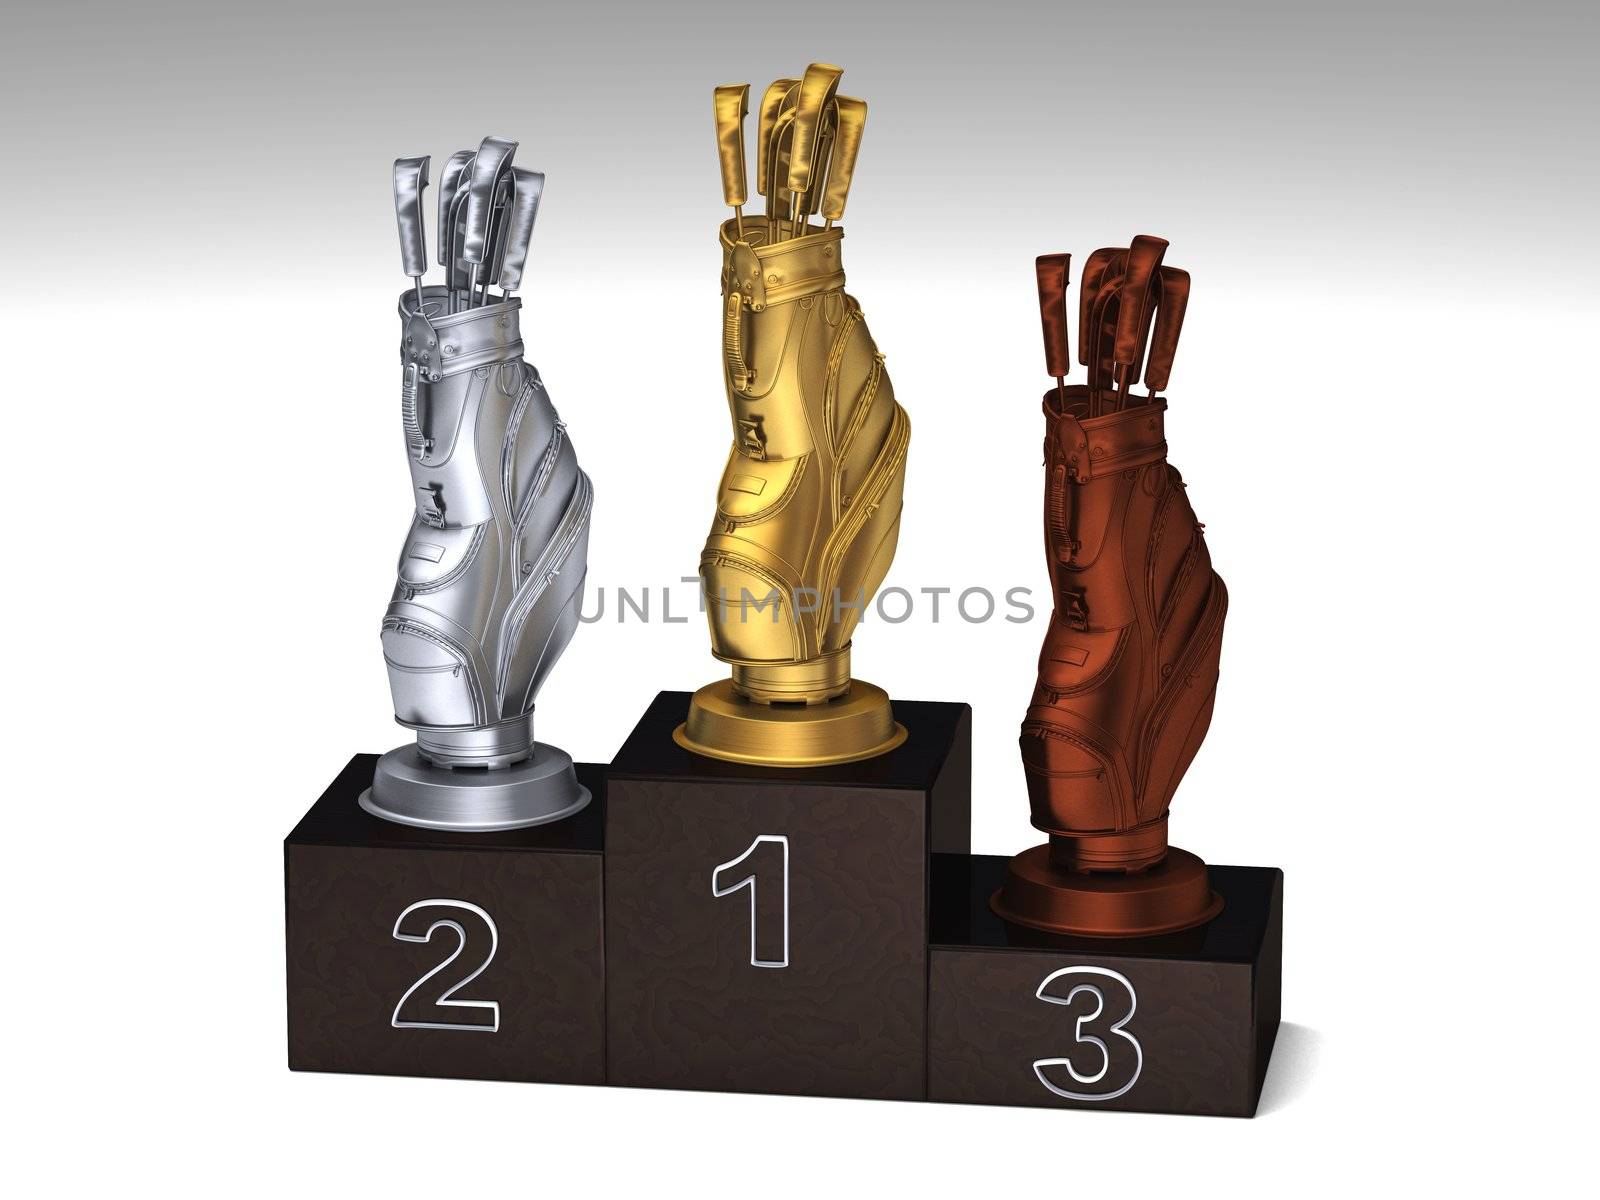 Golf dark wood podium with trophies on a white floor